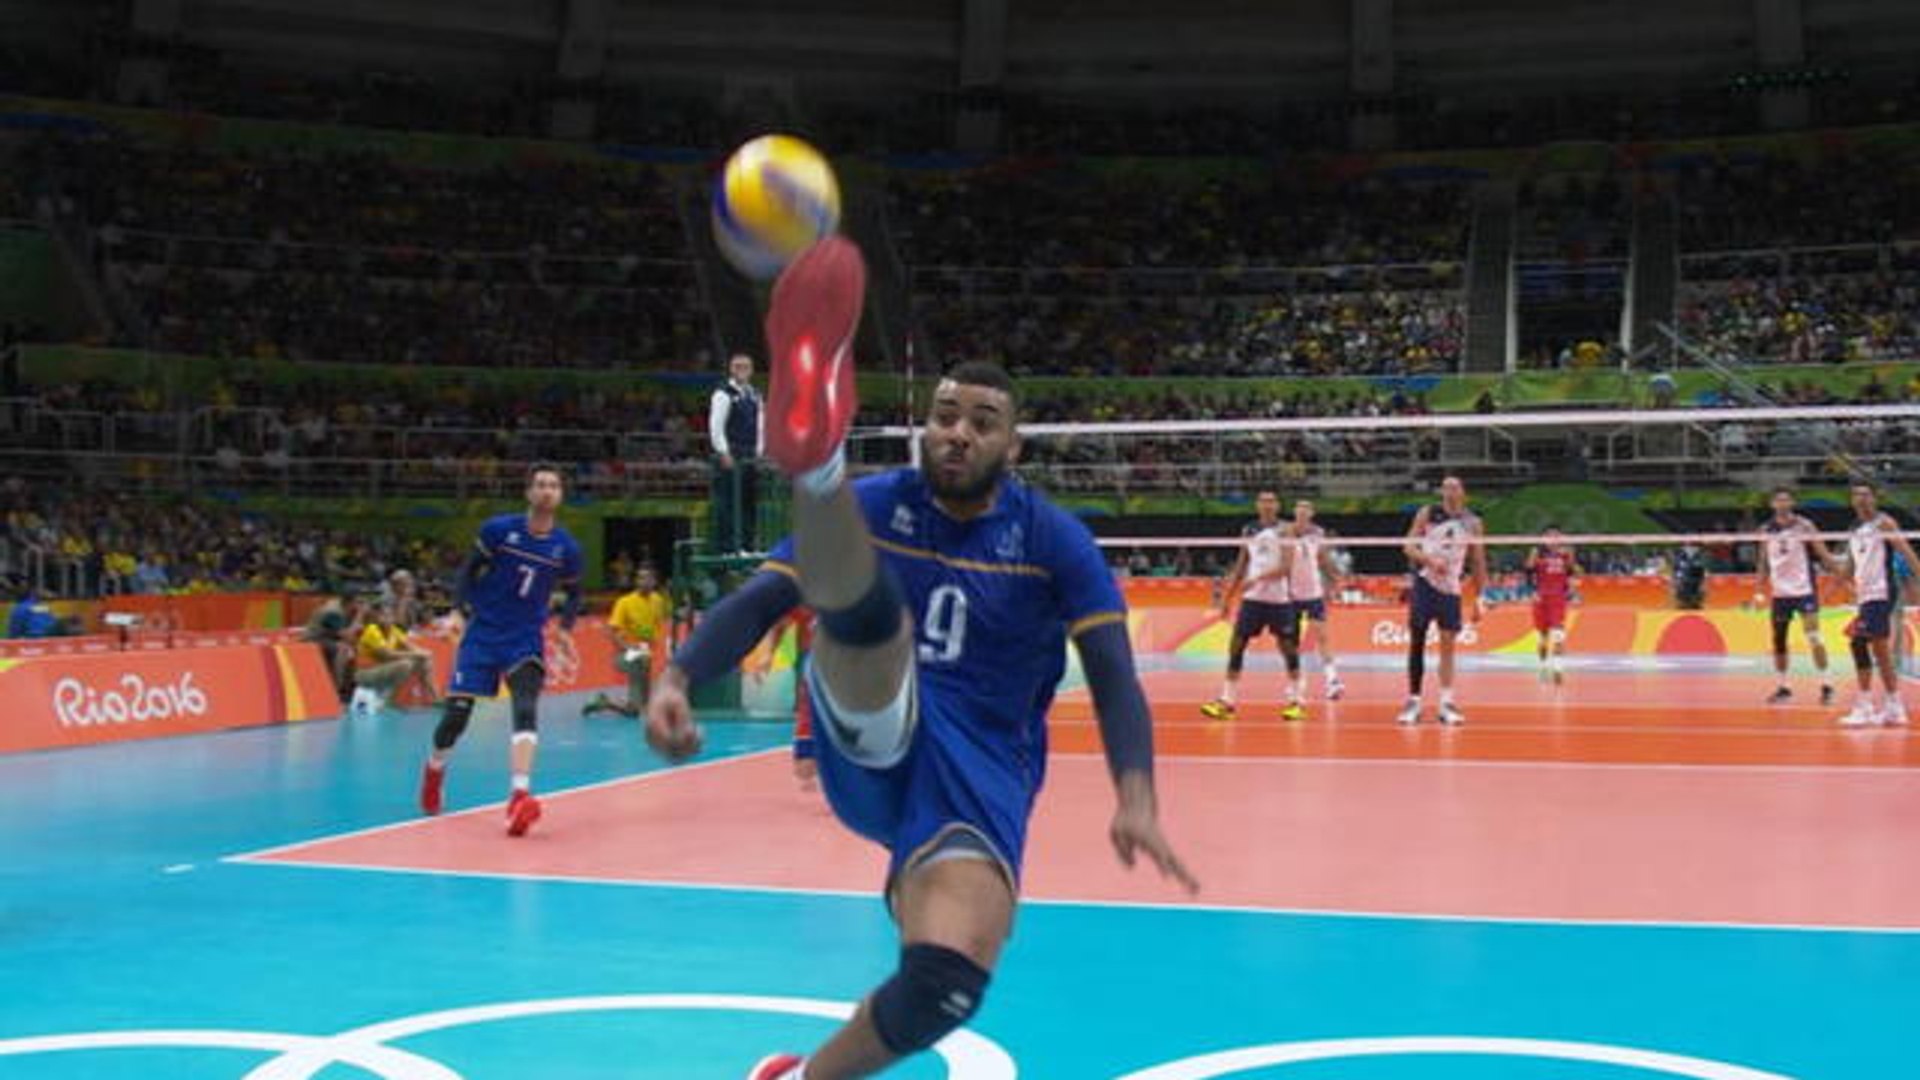 Volley - Earvin Ngapeth balle au pied ! - Vidéo Dailymotion